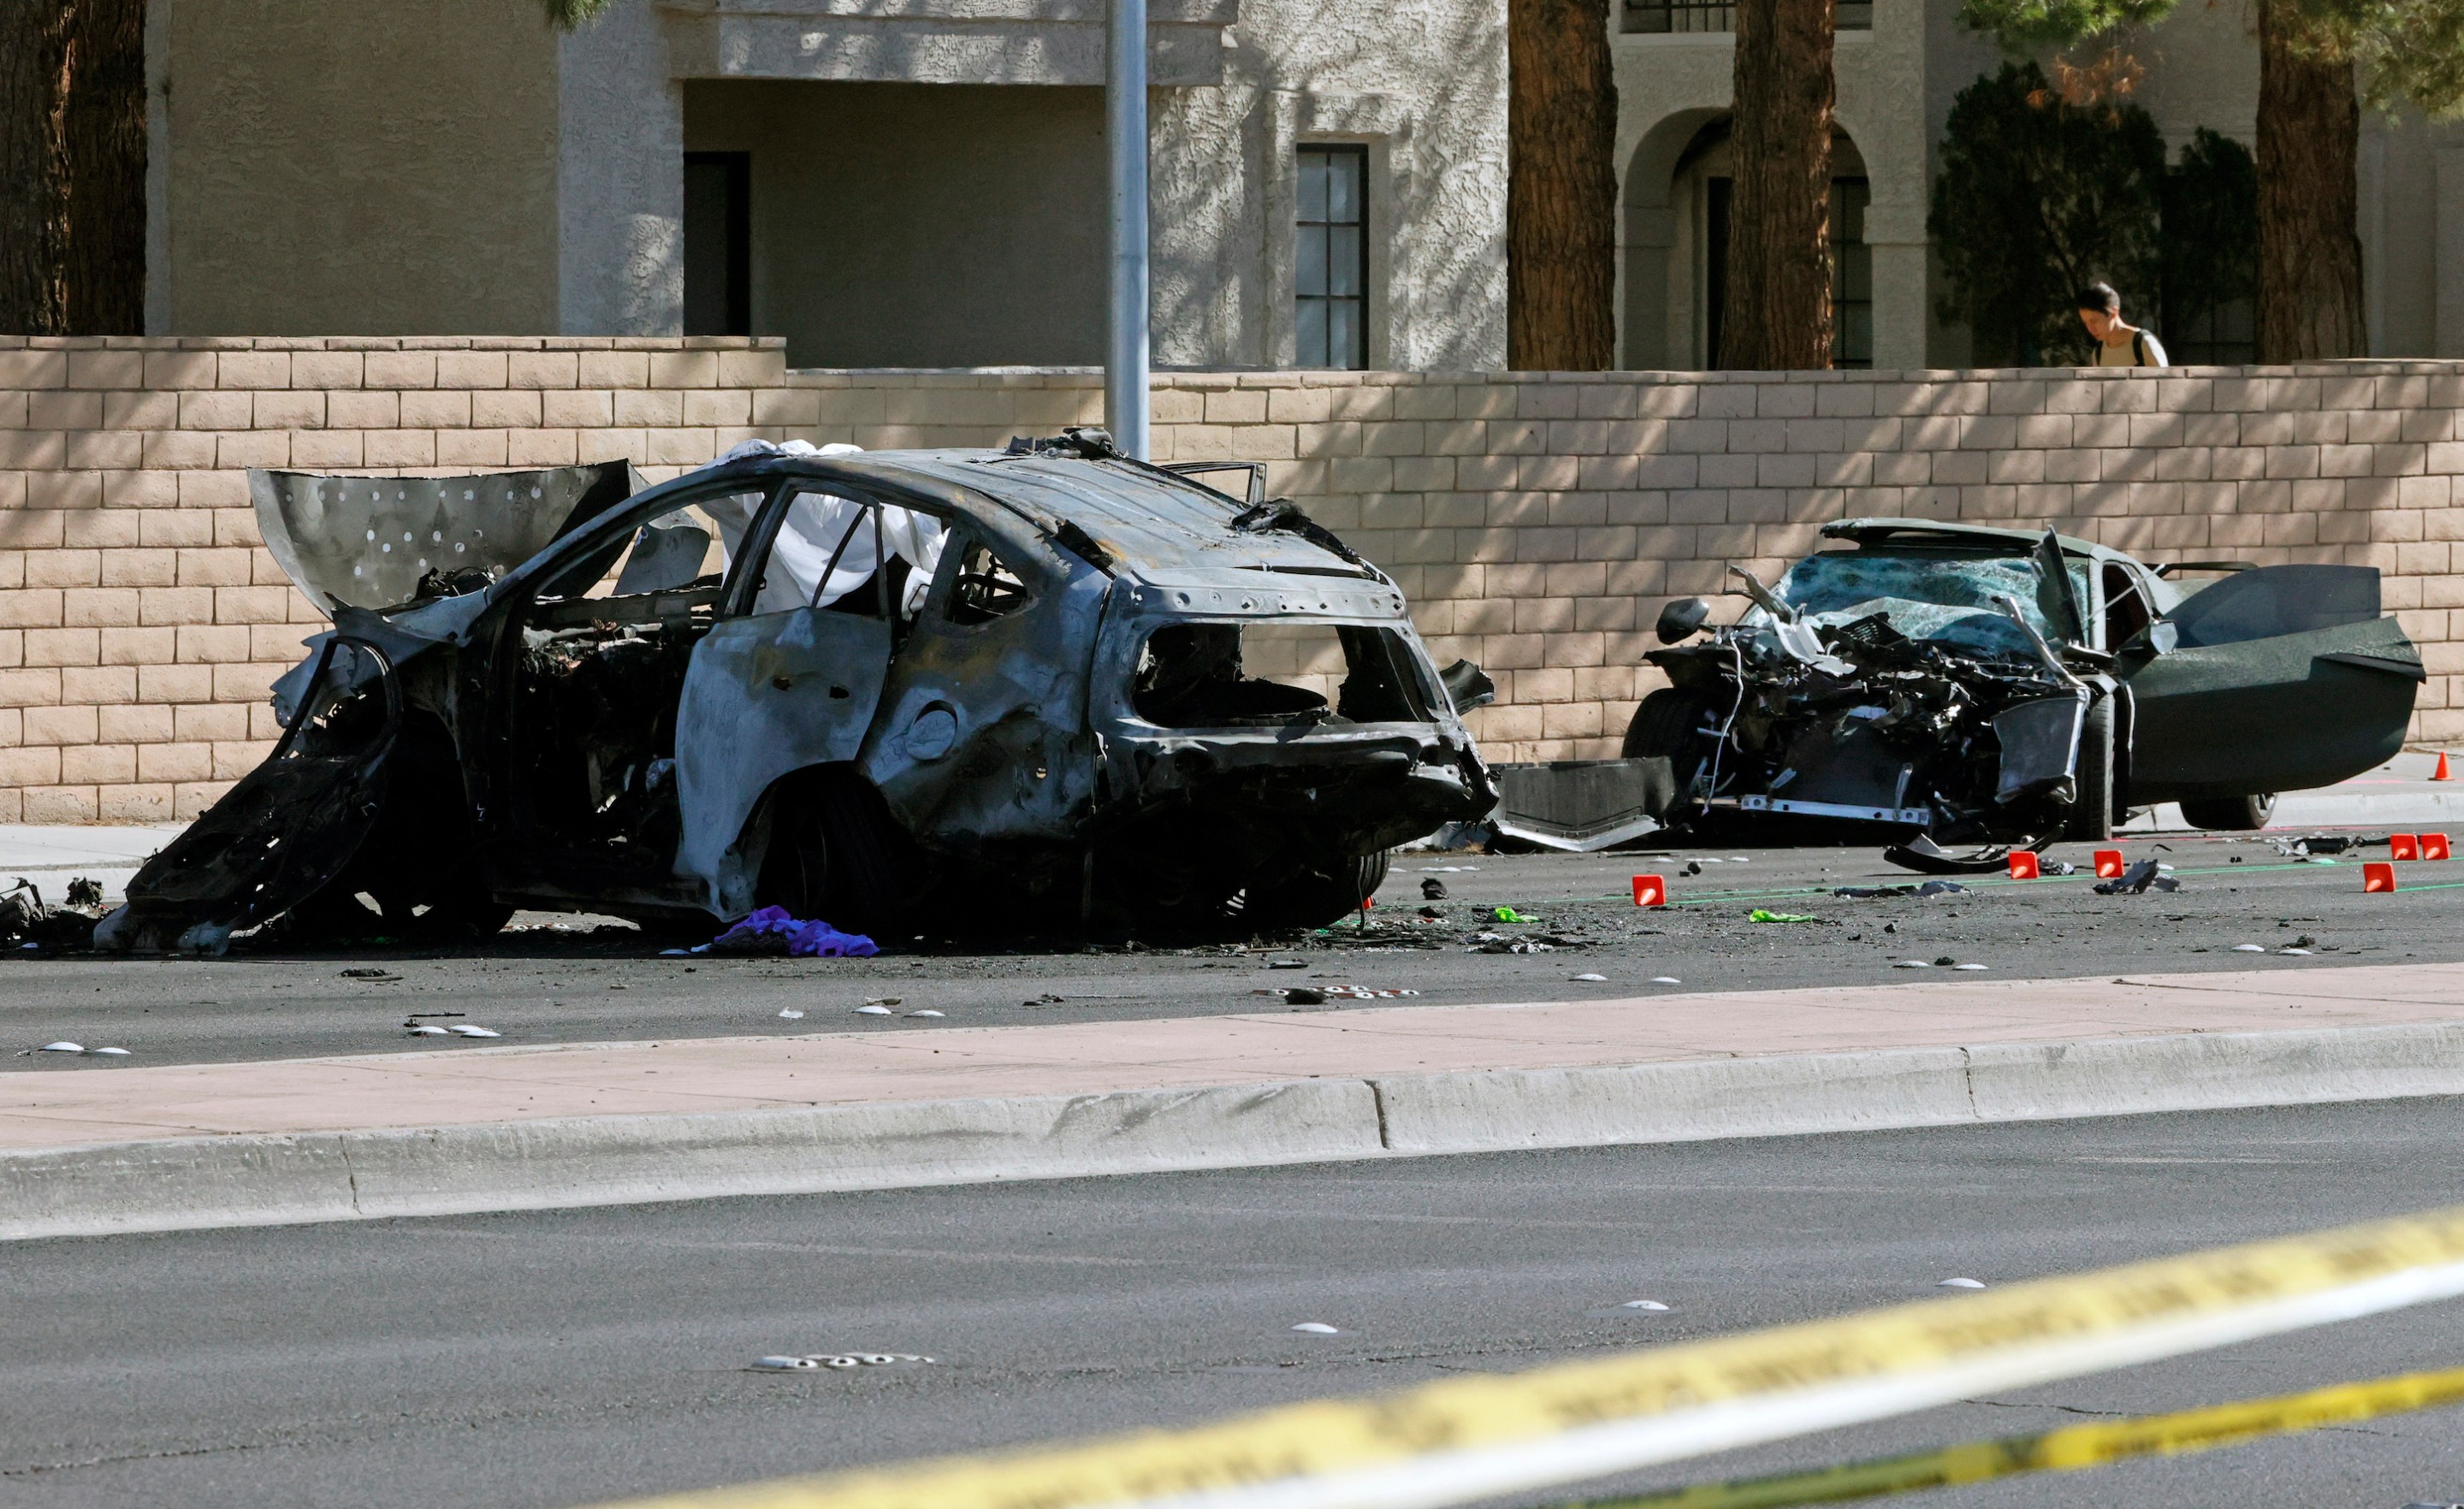 A Toyota RAV4 at left and a Chevrolet Corvette that were involved in a fatal accident are shown on November 2, 2021 in Las Vegas, Nevada. According to the Las Vegas Metropolitan Police Department, the Corvette was being driven by wide receiver Henry Ruggs III of the NFL Las Vegas Raiders when it hit the RAV4, killing a woman.